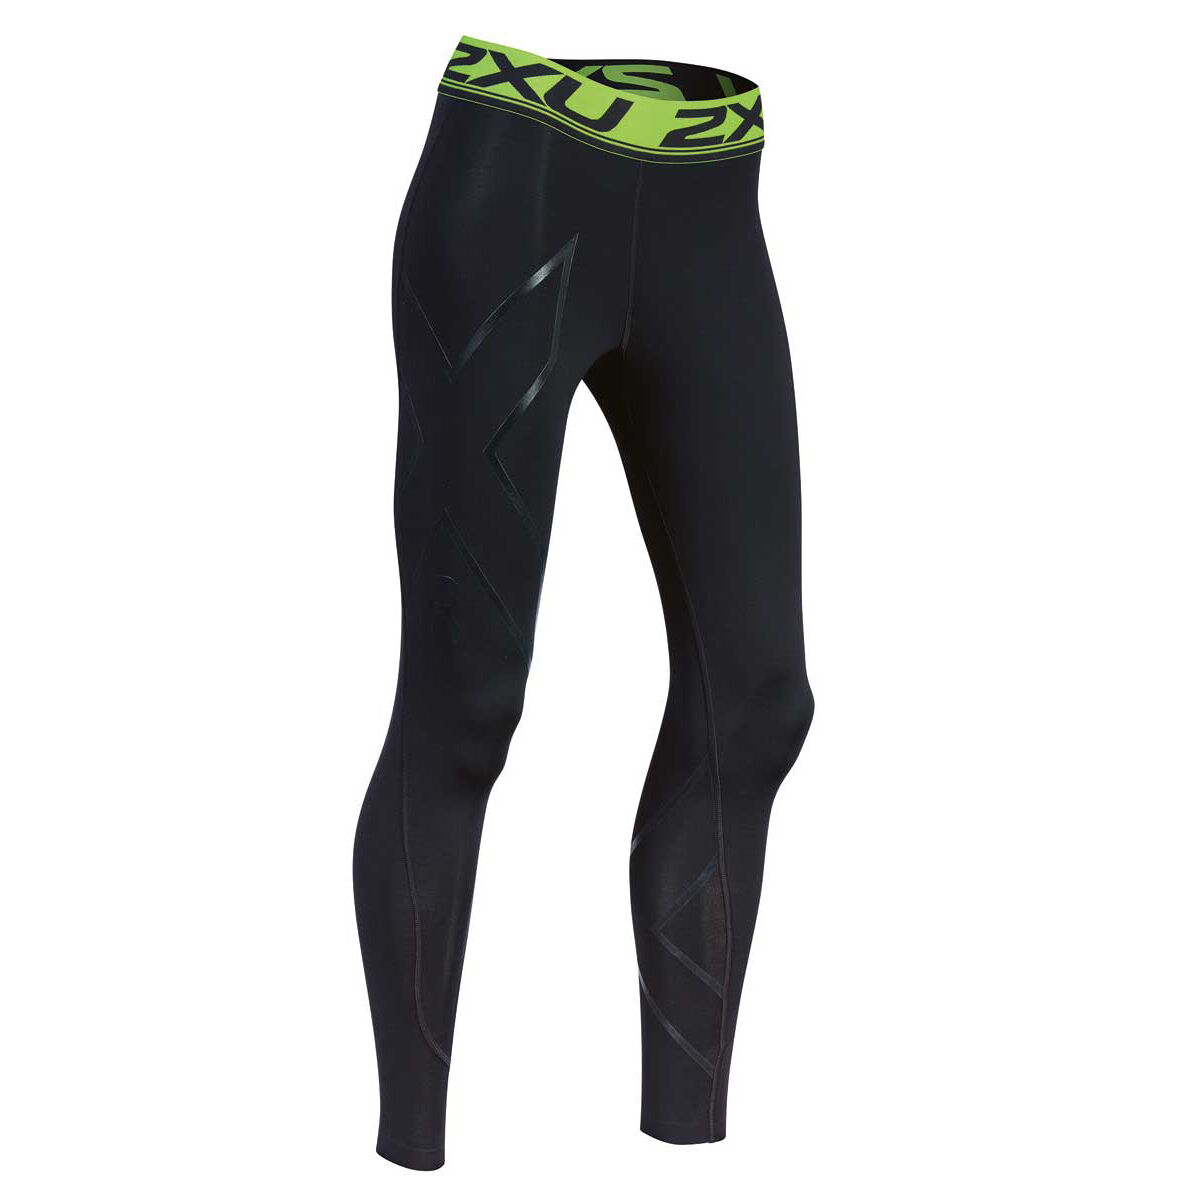 2XU Power Recovery Compression Tights Leggings, Women's Fashion